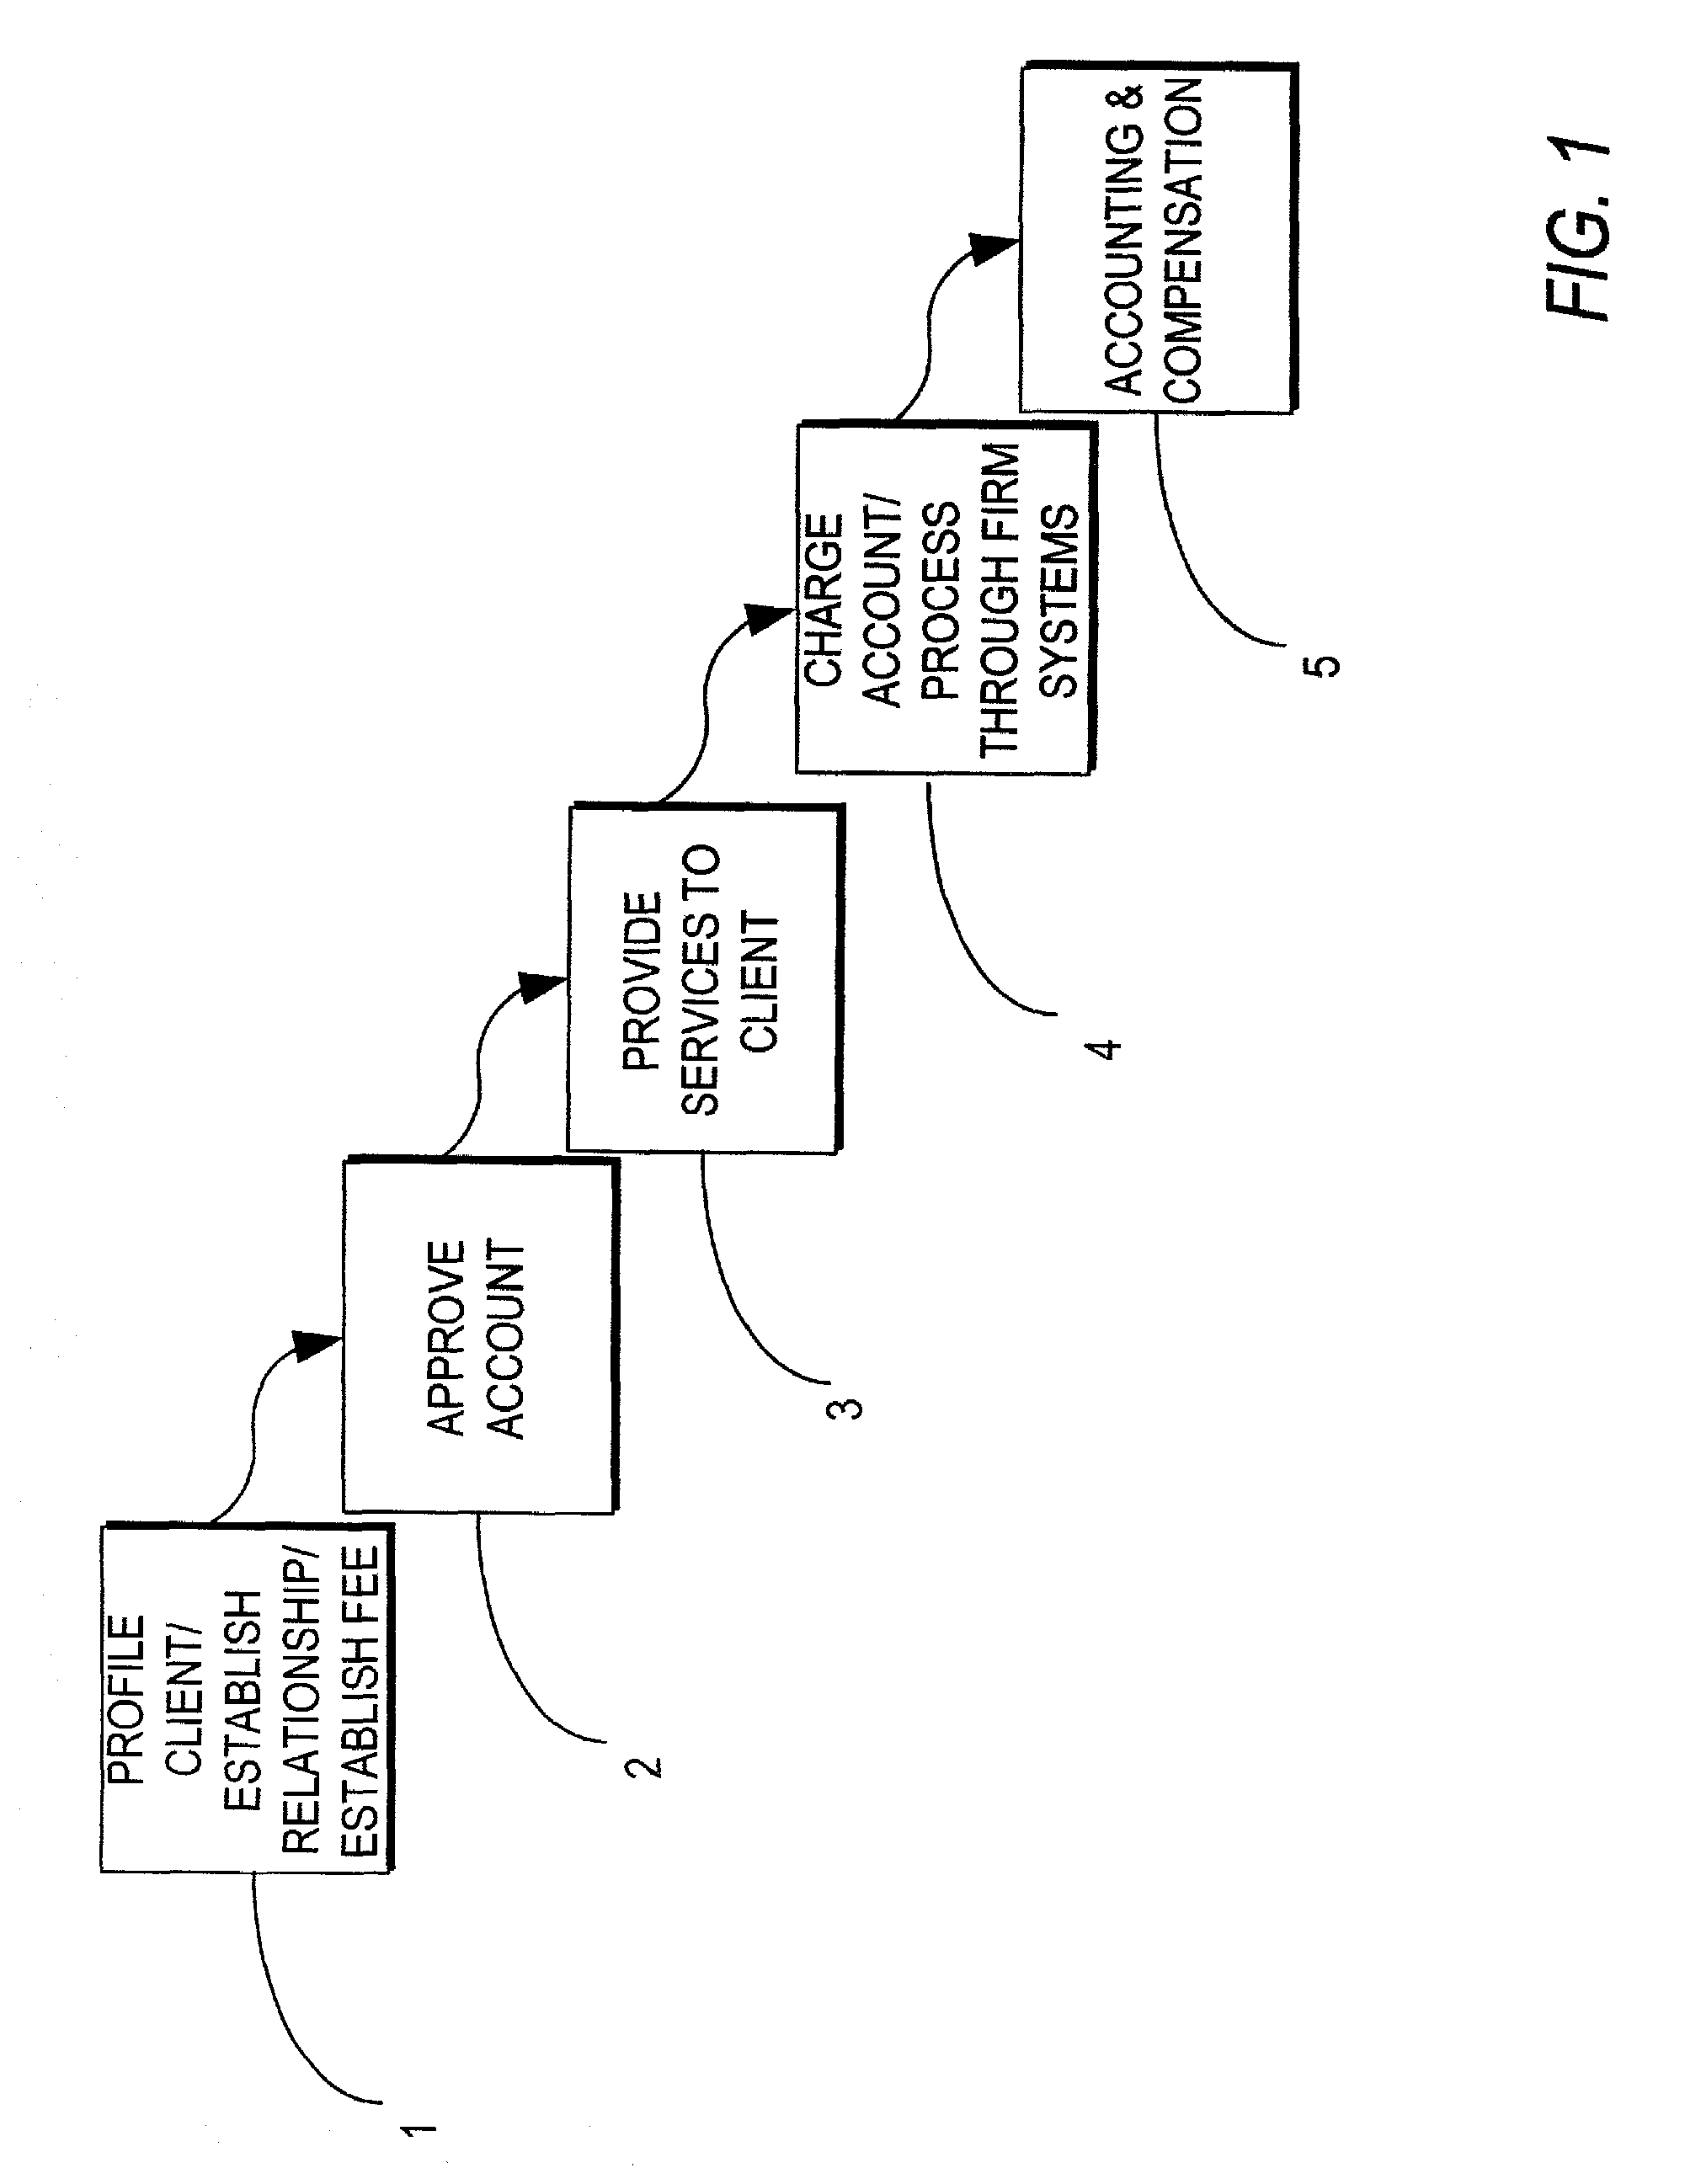 Systems, apparatus and methods for establishing a flat fee brokerage account system